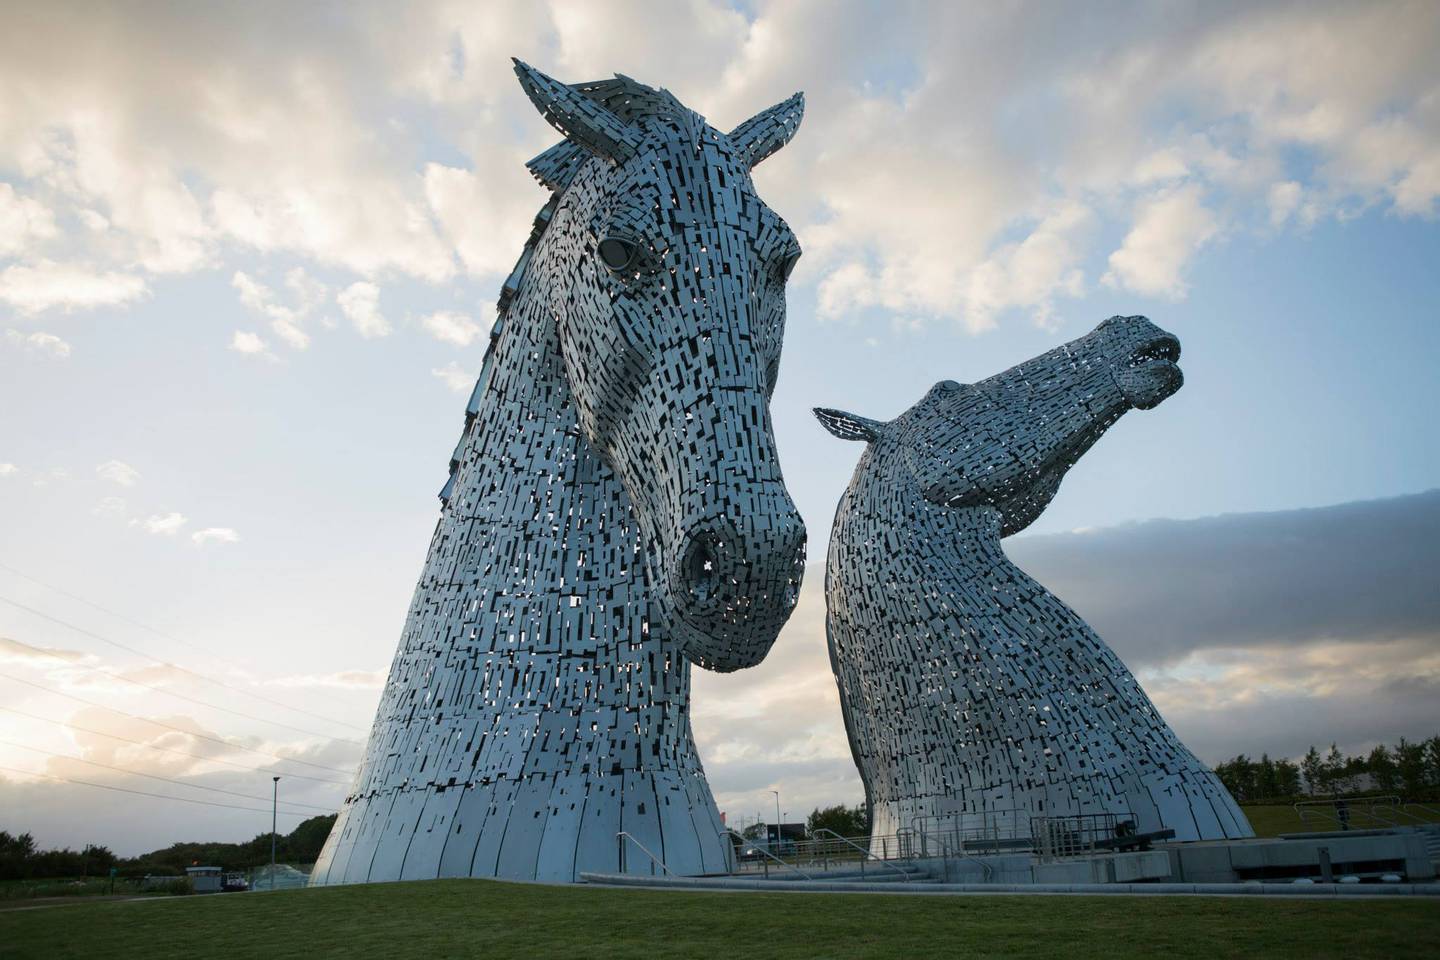 The Kelpies are a monument paying tribute to Scotland's working horses. Patrick Connolly went to great lengths to get there.